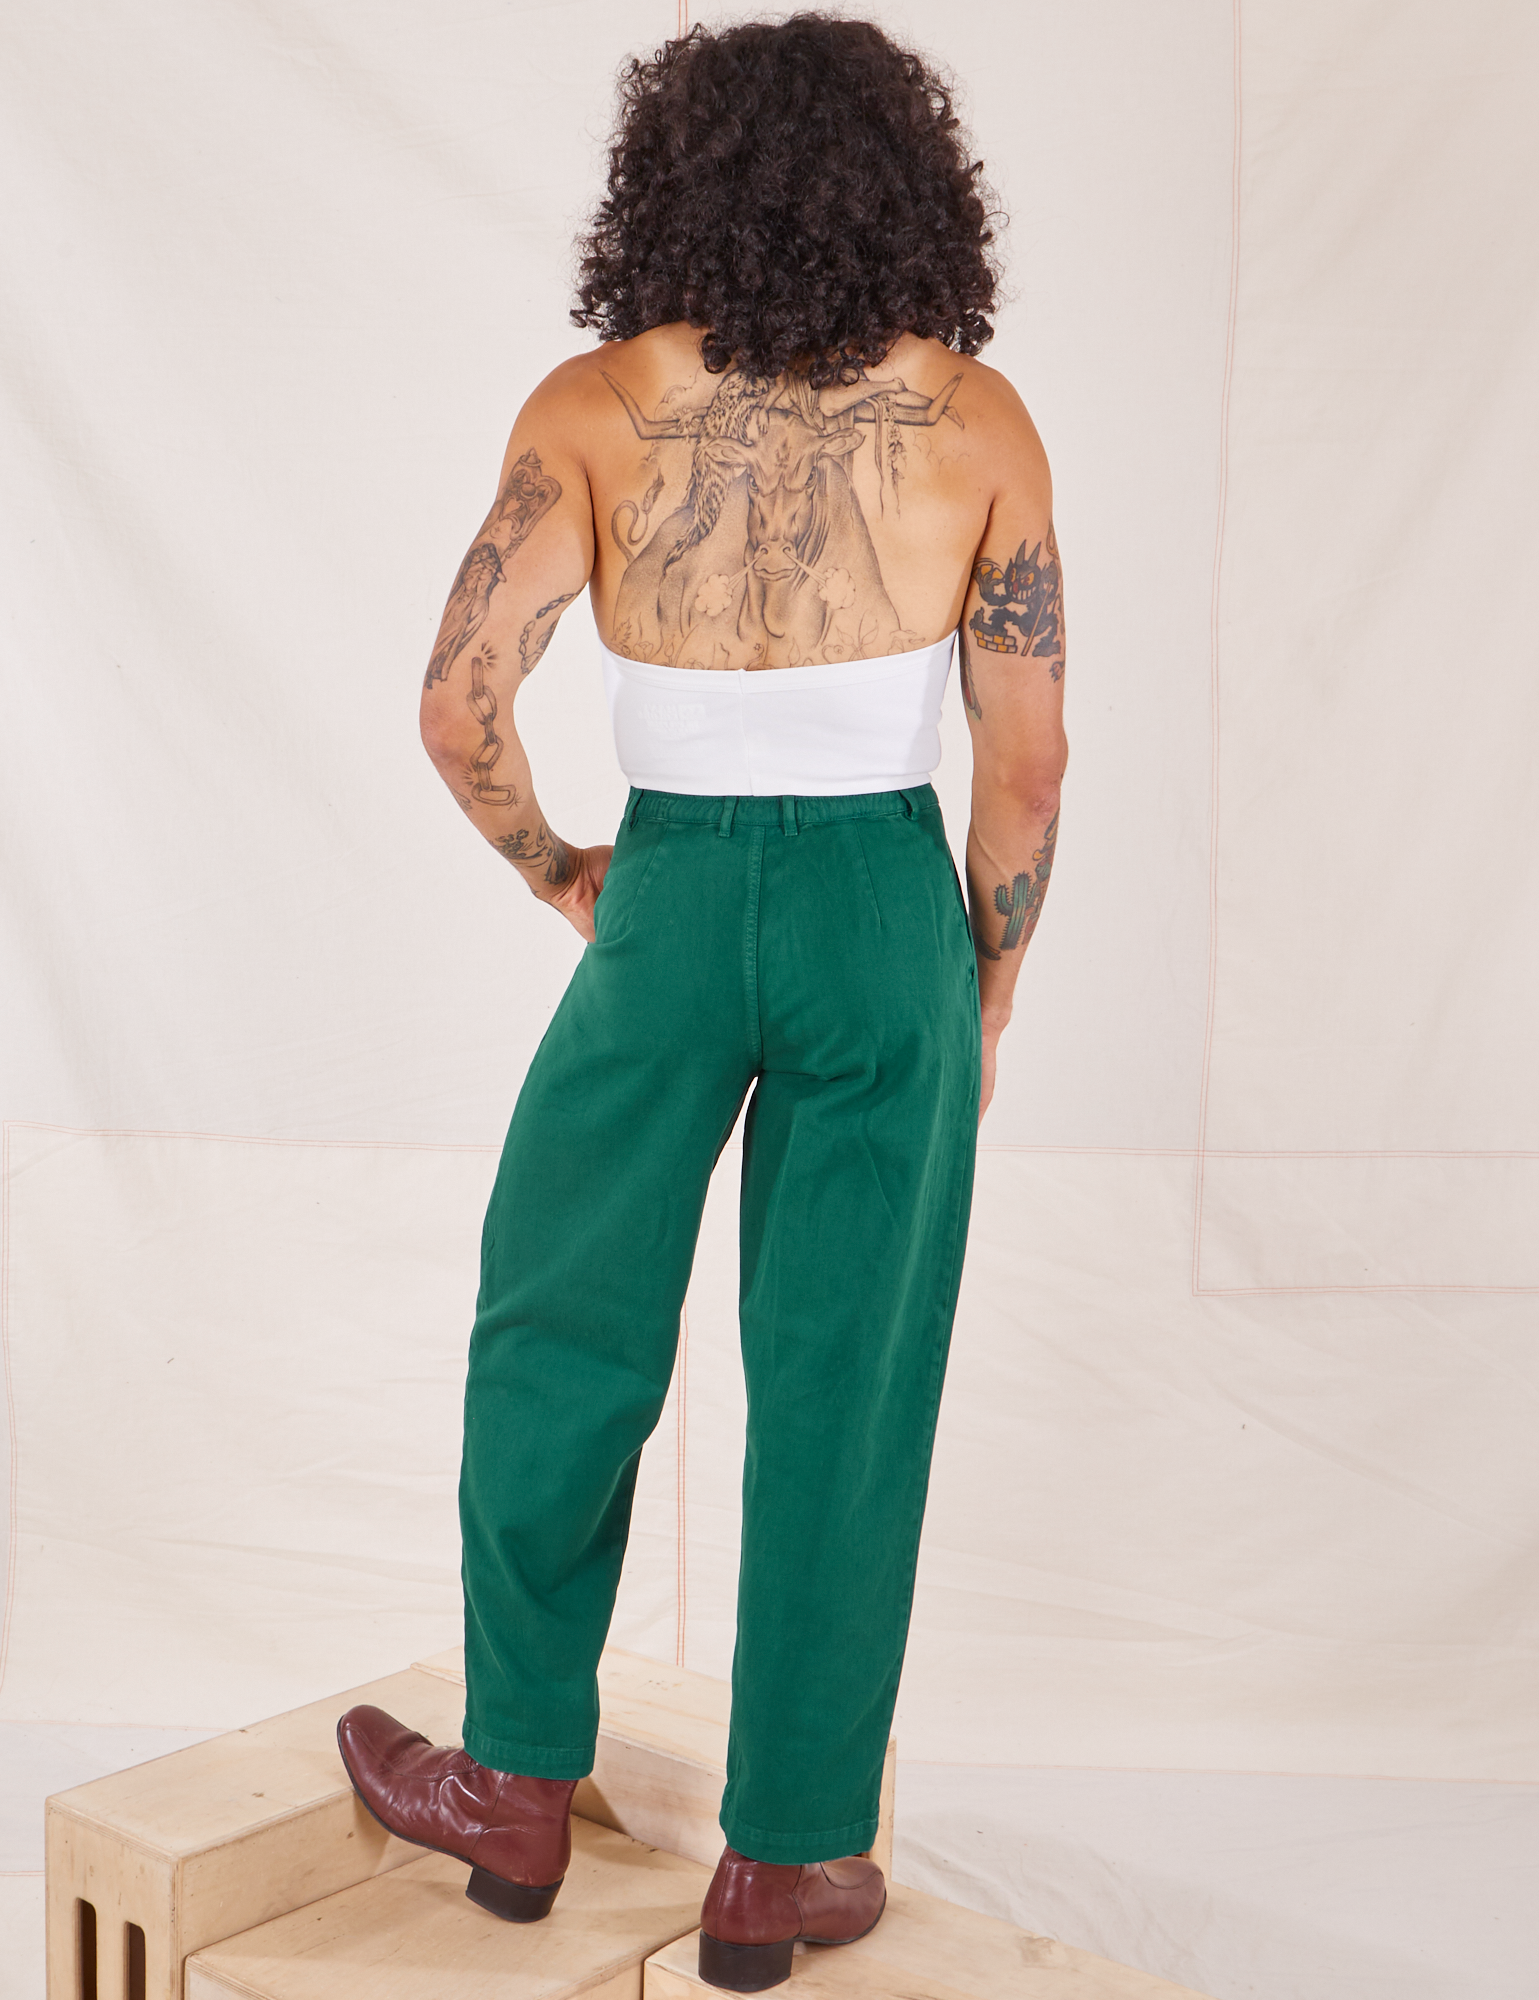 Back view of Heavyweight Trousers in Hunter Green and vintage off-white Halter Top worn by Jesse